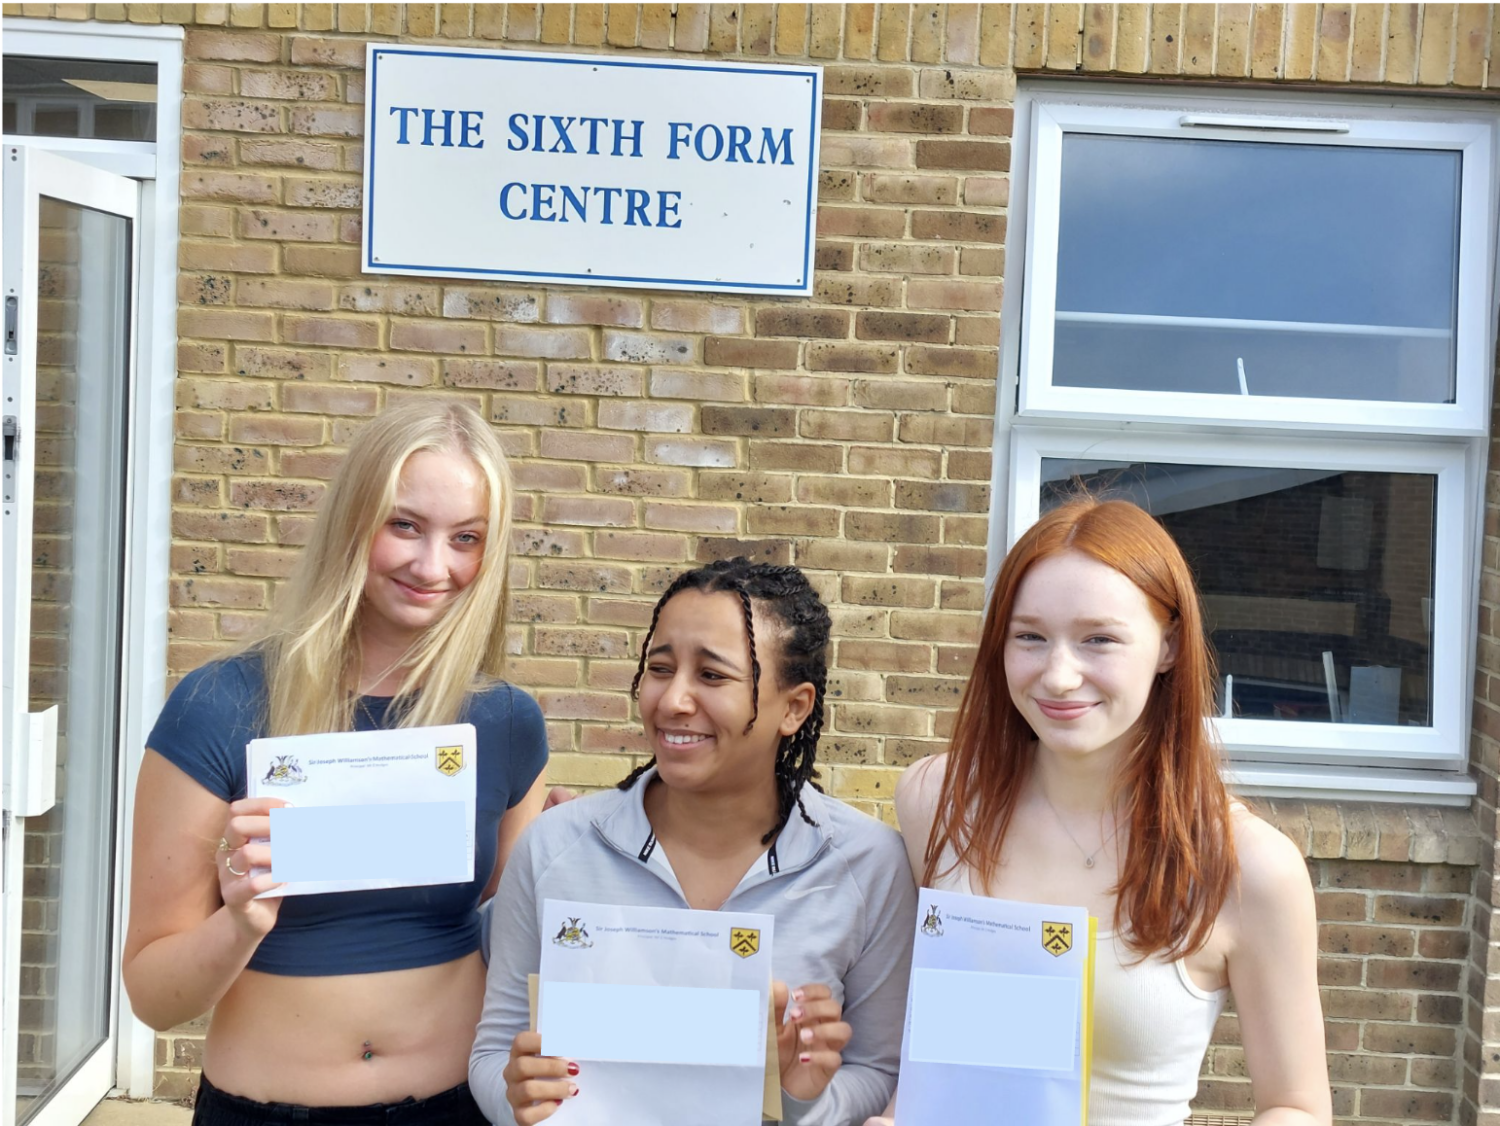 Zara, Sarah and Jess holding their results